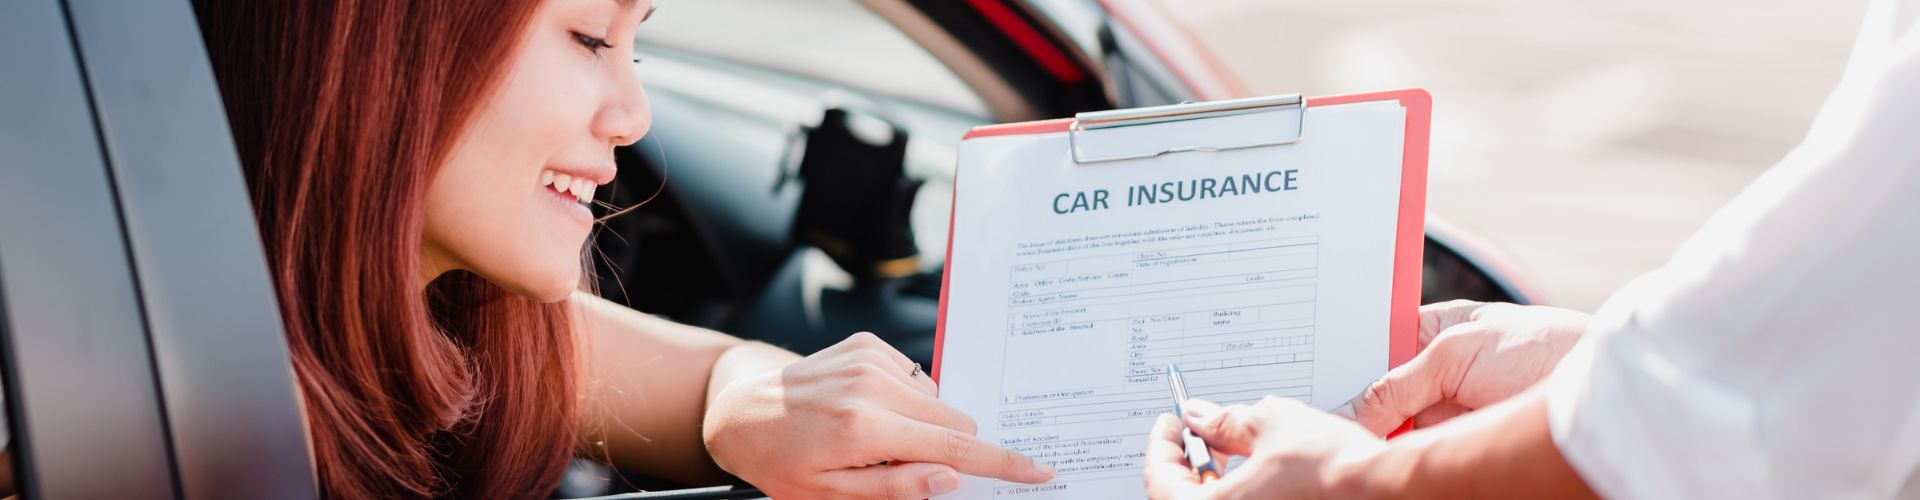 woman in red car pointing at car insurance contract